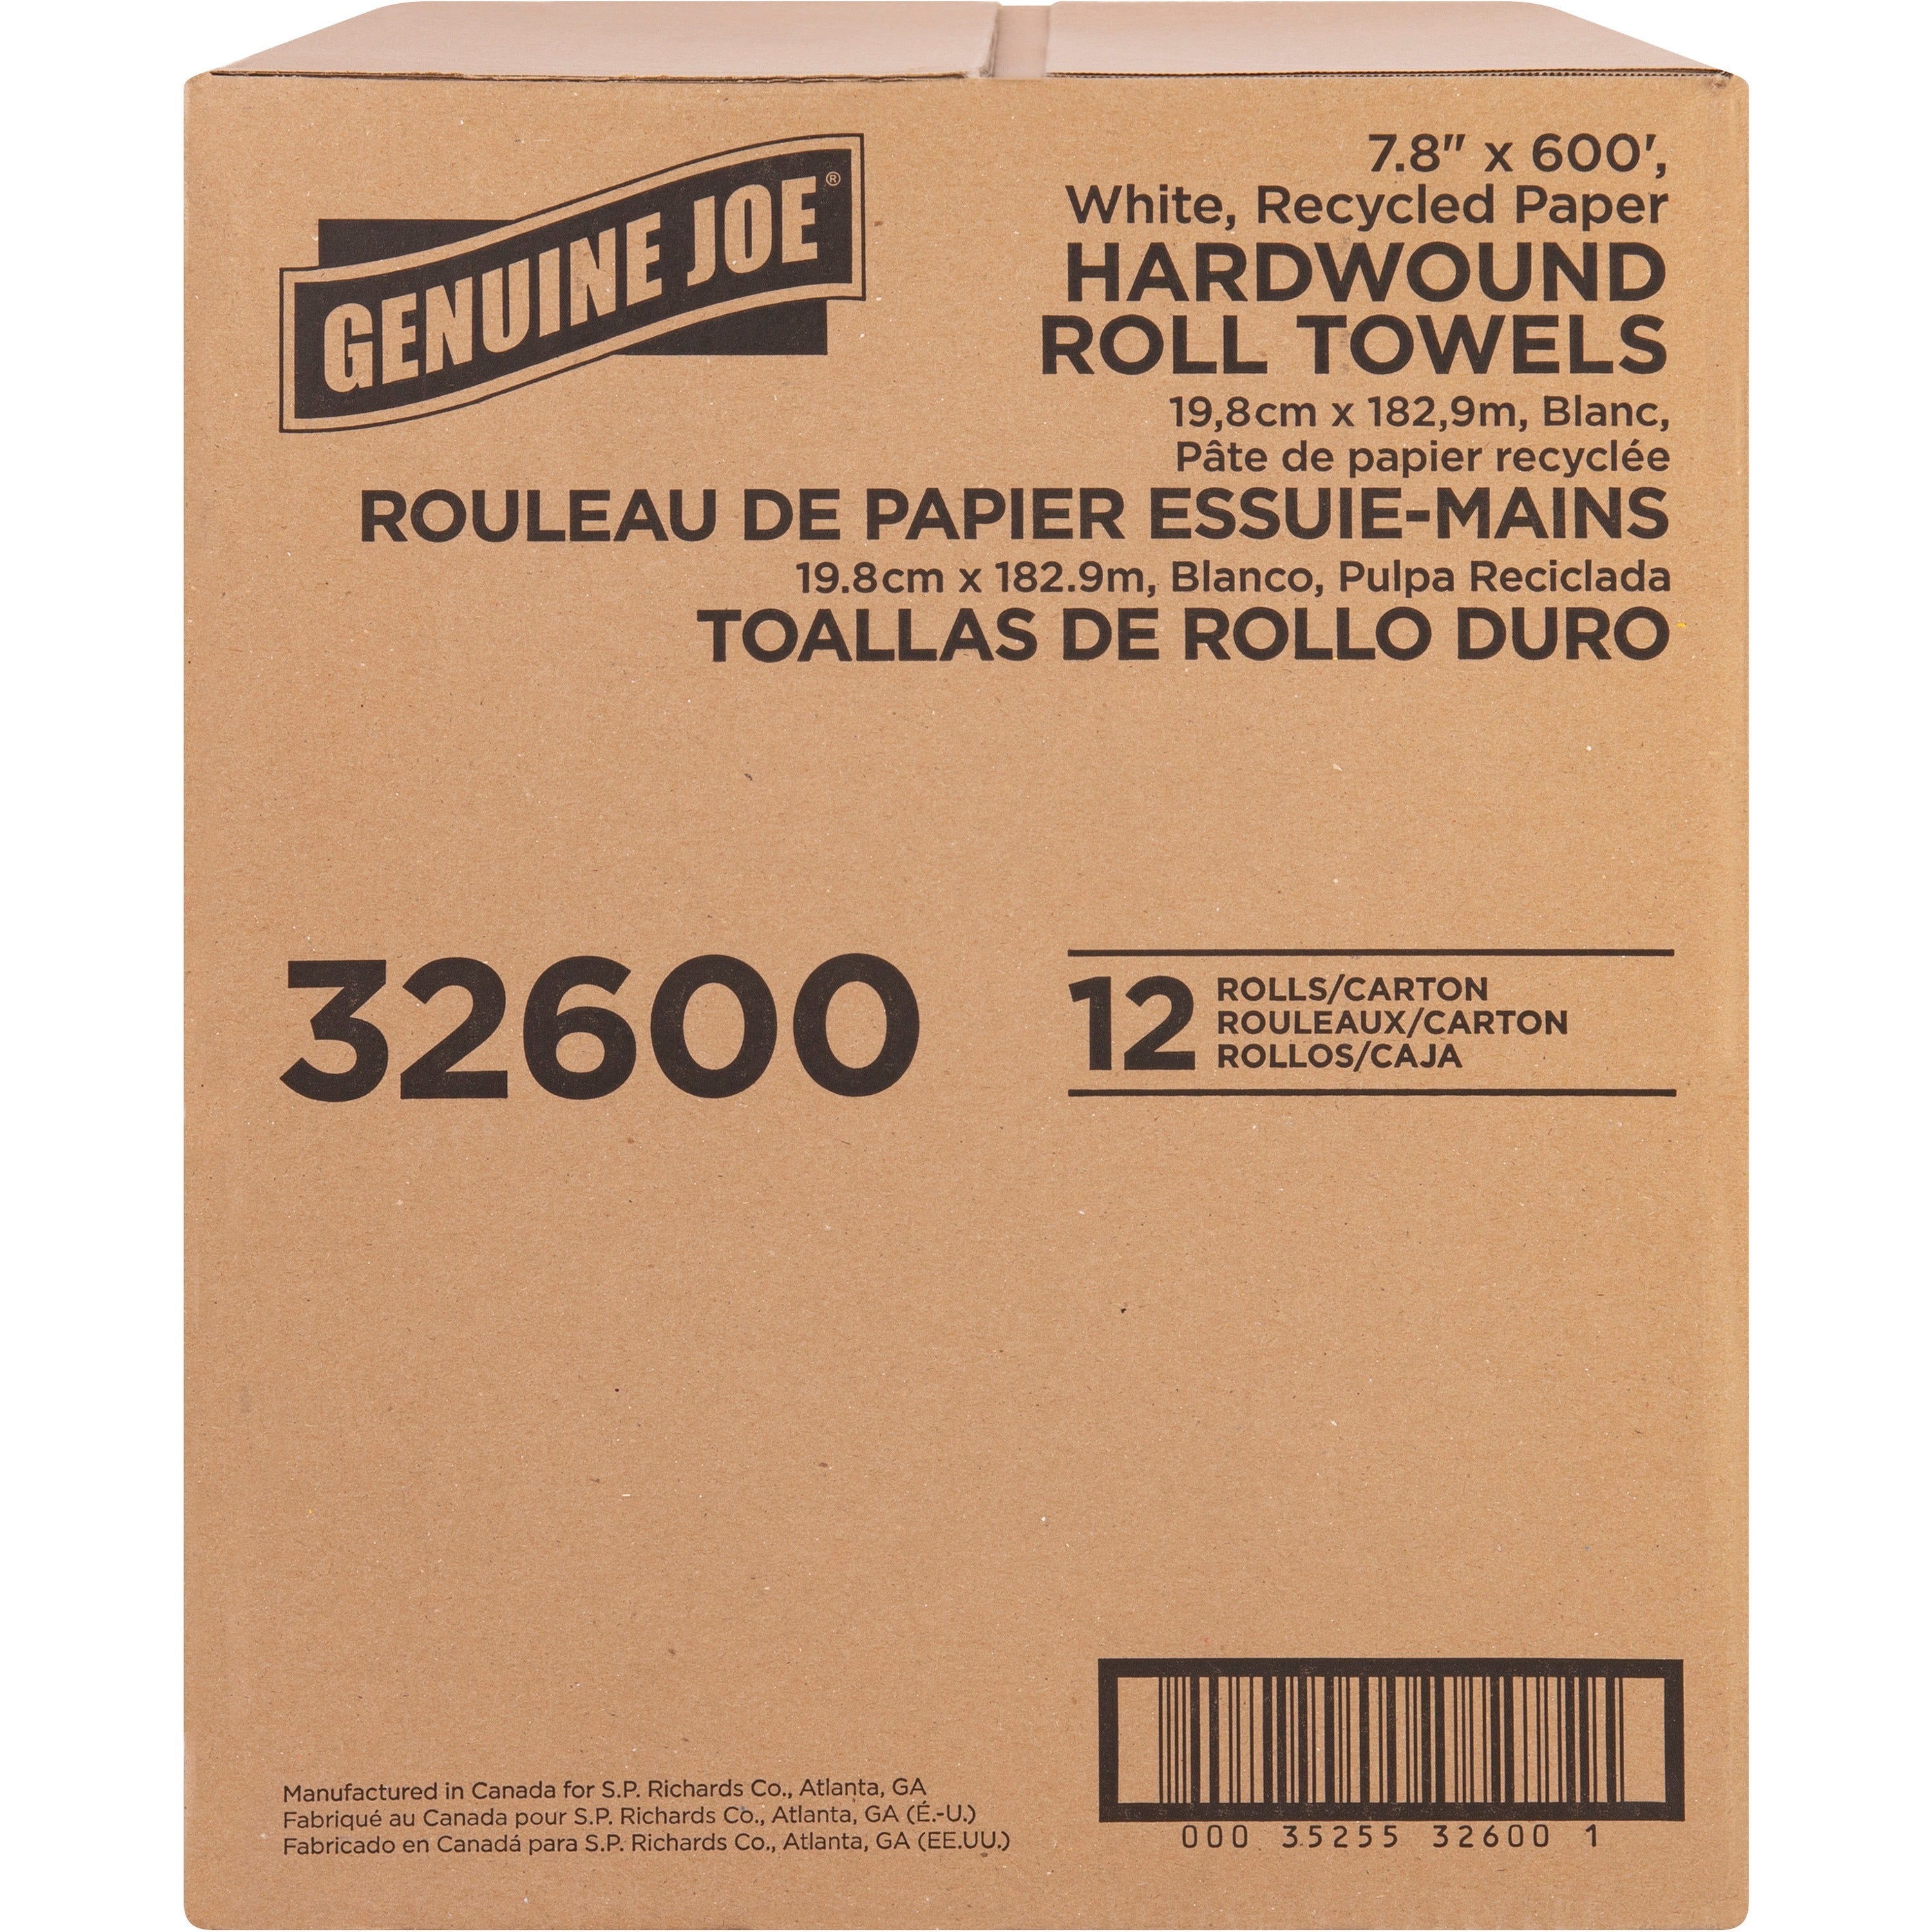 genuine-joe-hardwound-roll-paper-towels-780-x-600-ft-2-core-white-paper-absorbent-for-restroom-12-carton_gjo32600 - 3